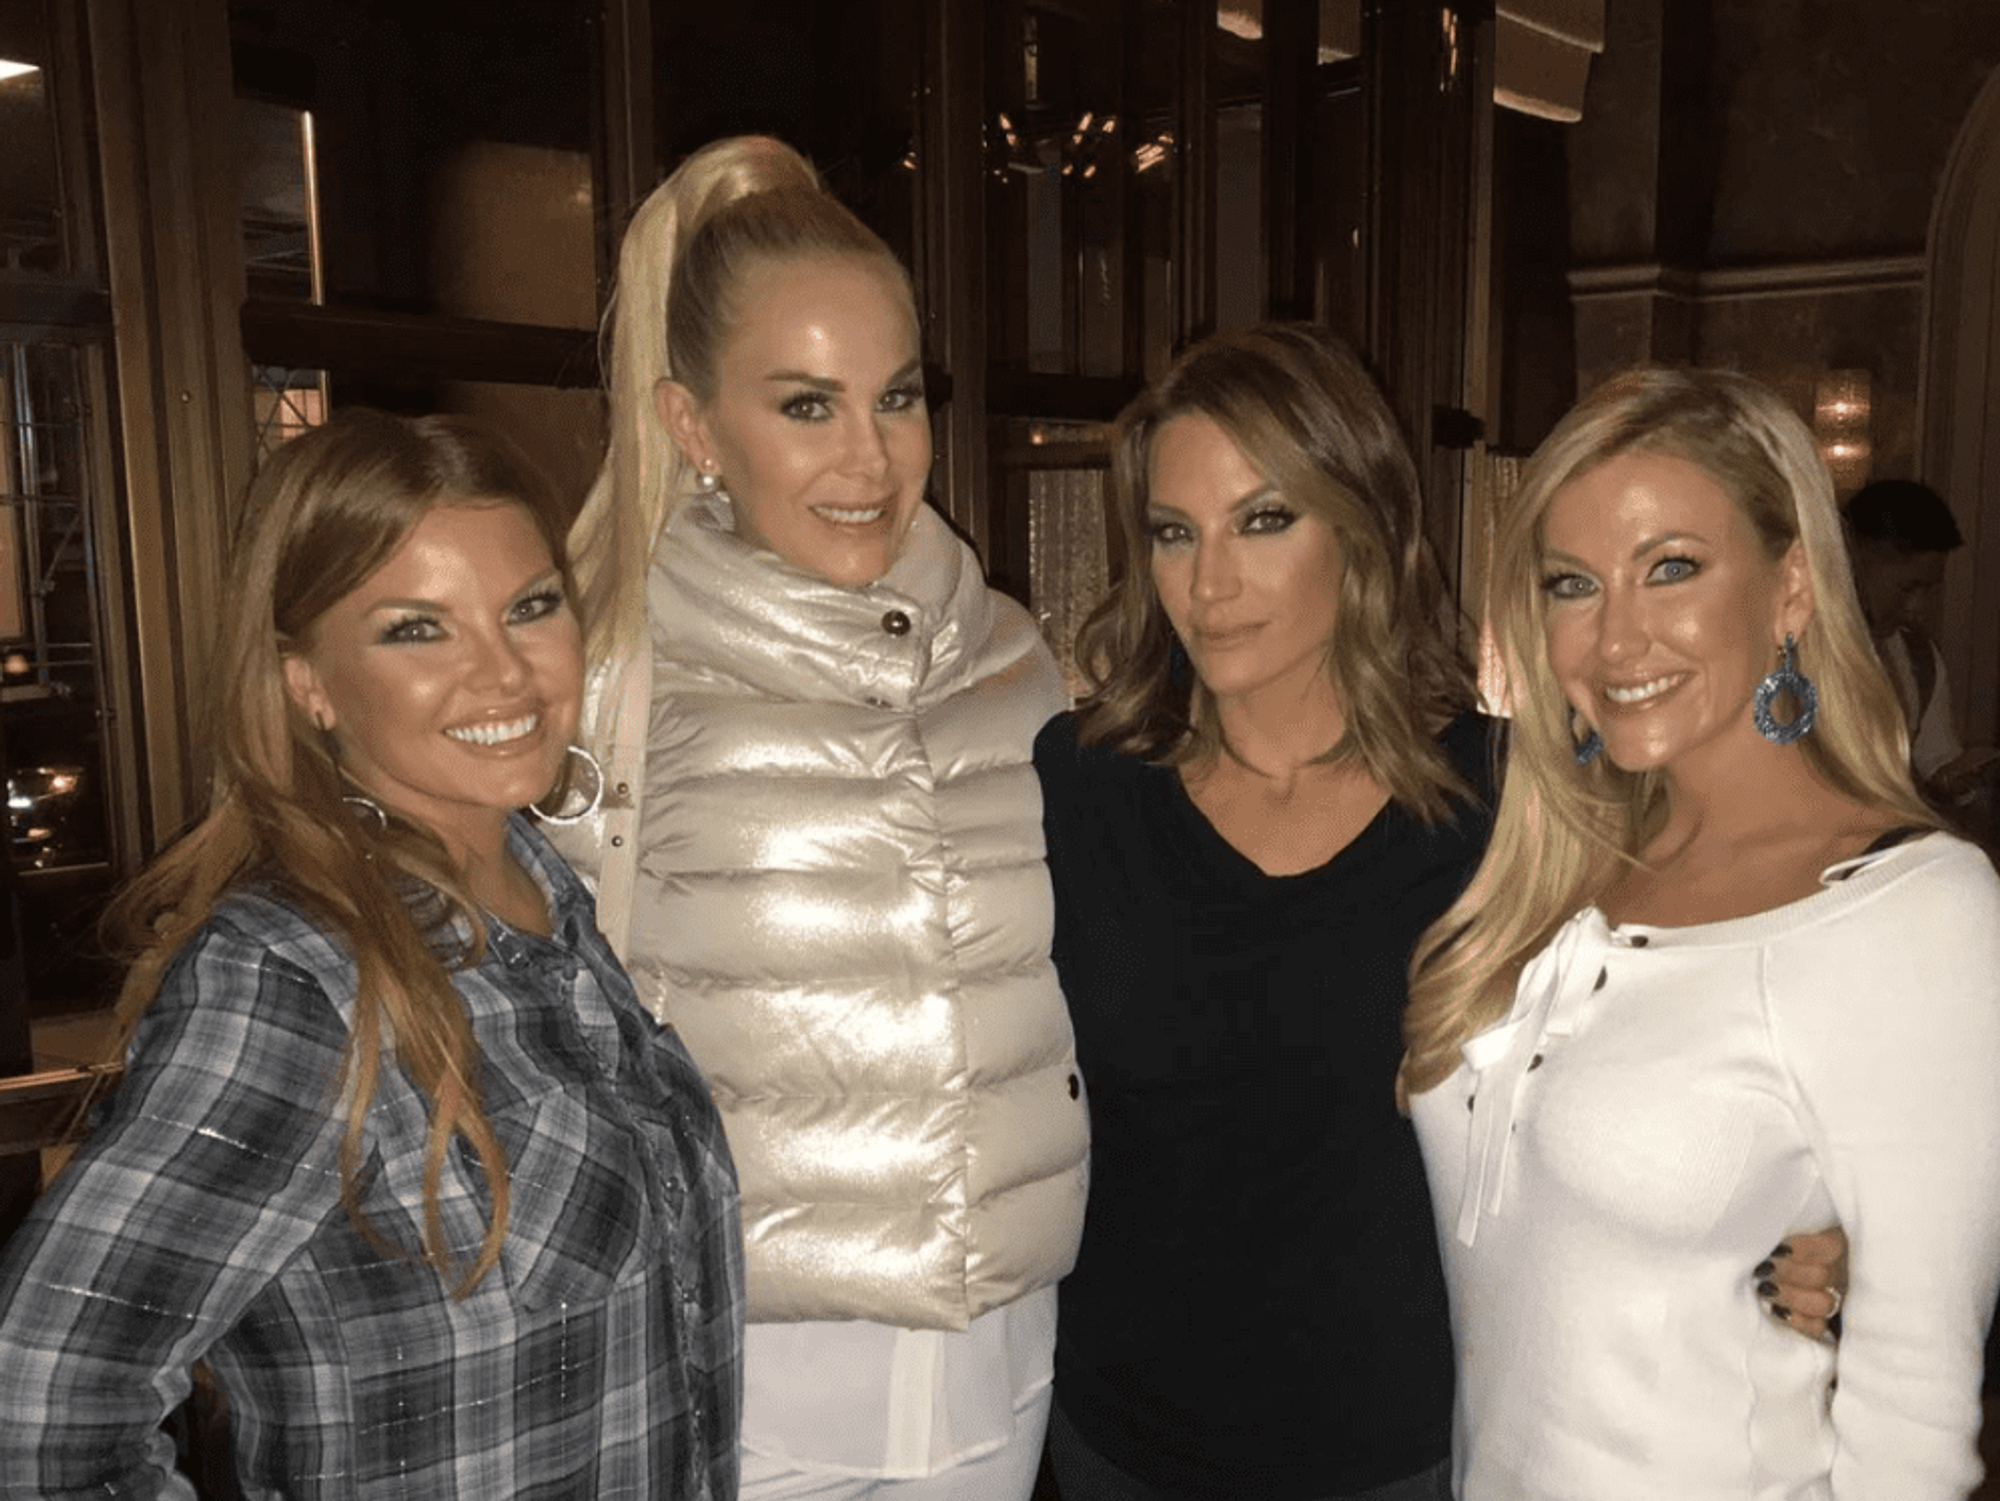 Real Housewives before season 2 reunion